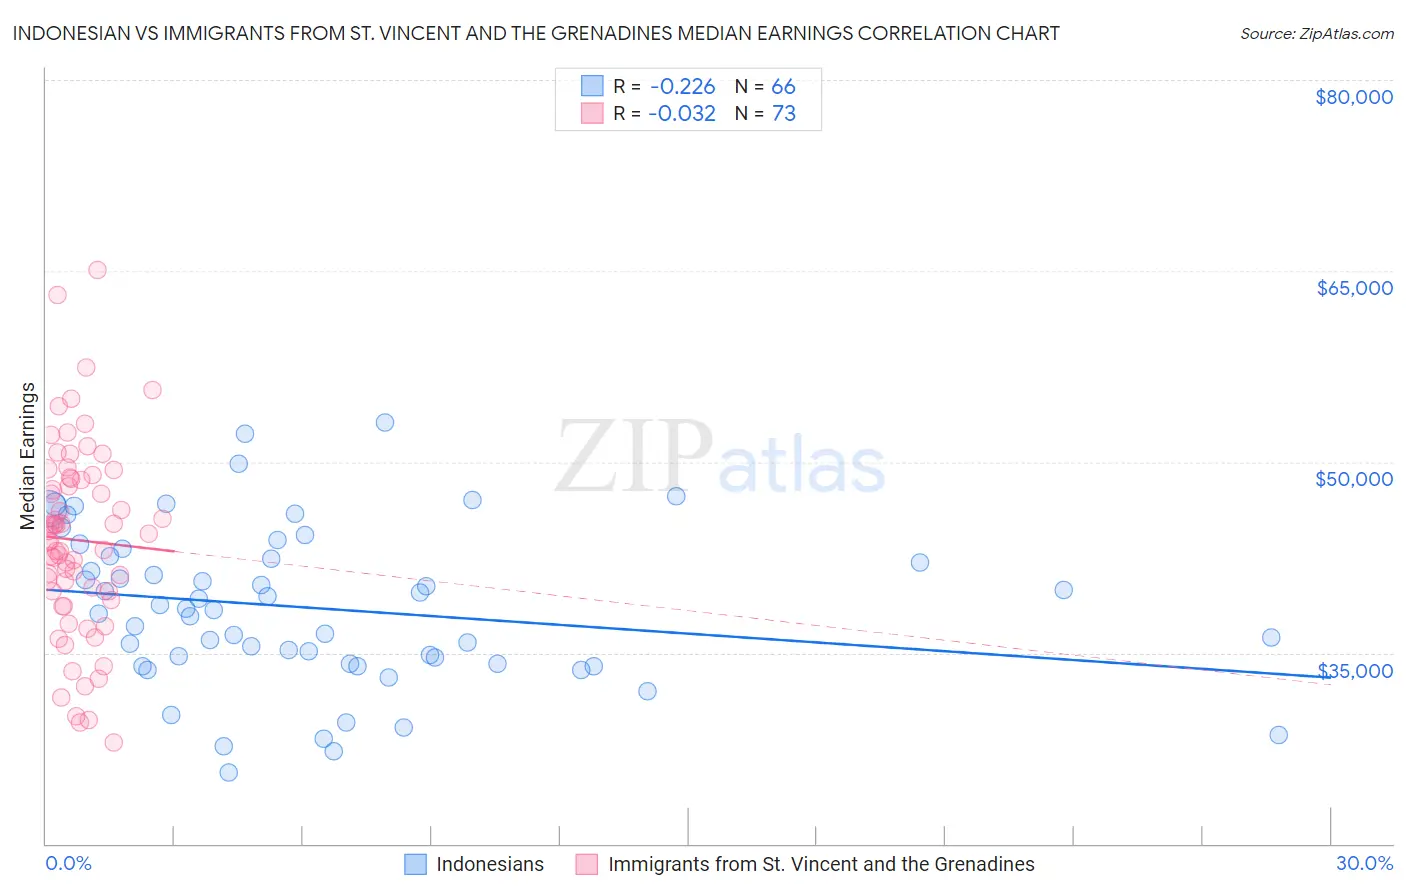 Indonesian vs Immigrants from St. Vincent and the Grenadines Median Earnings